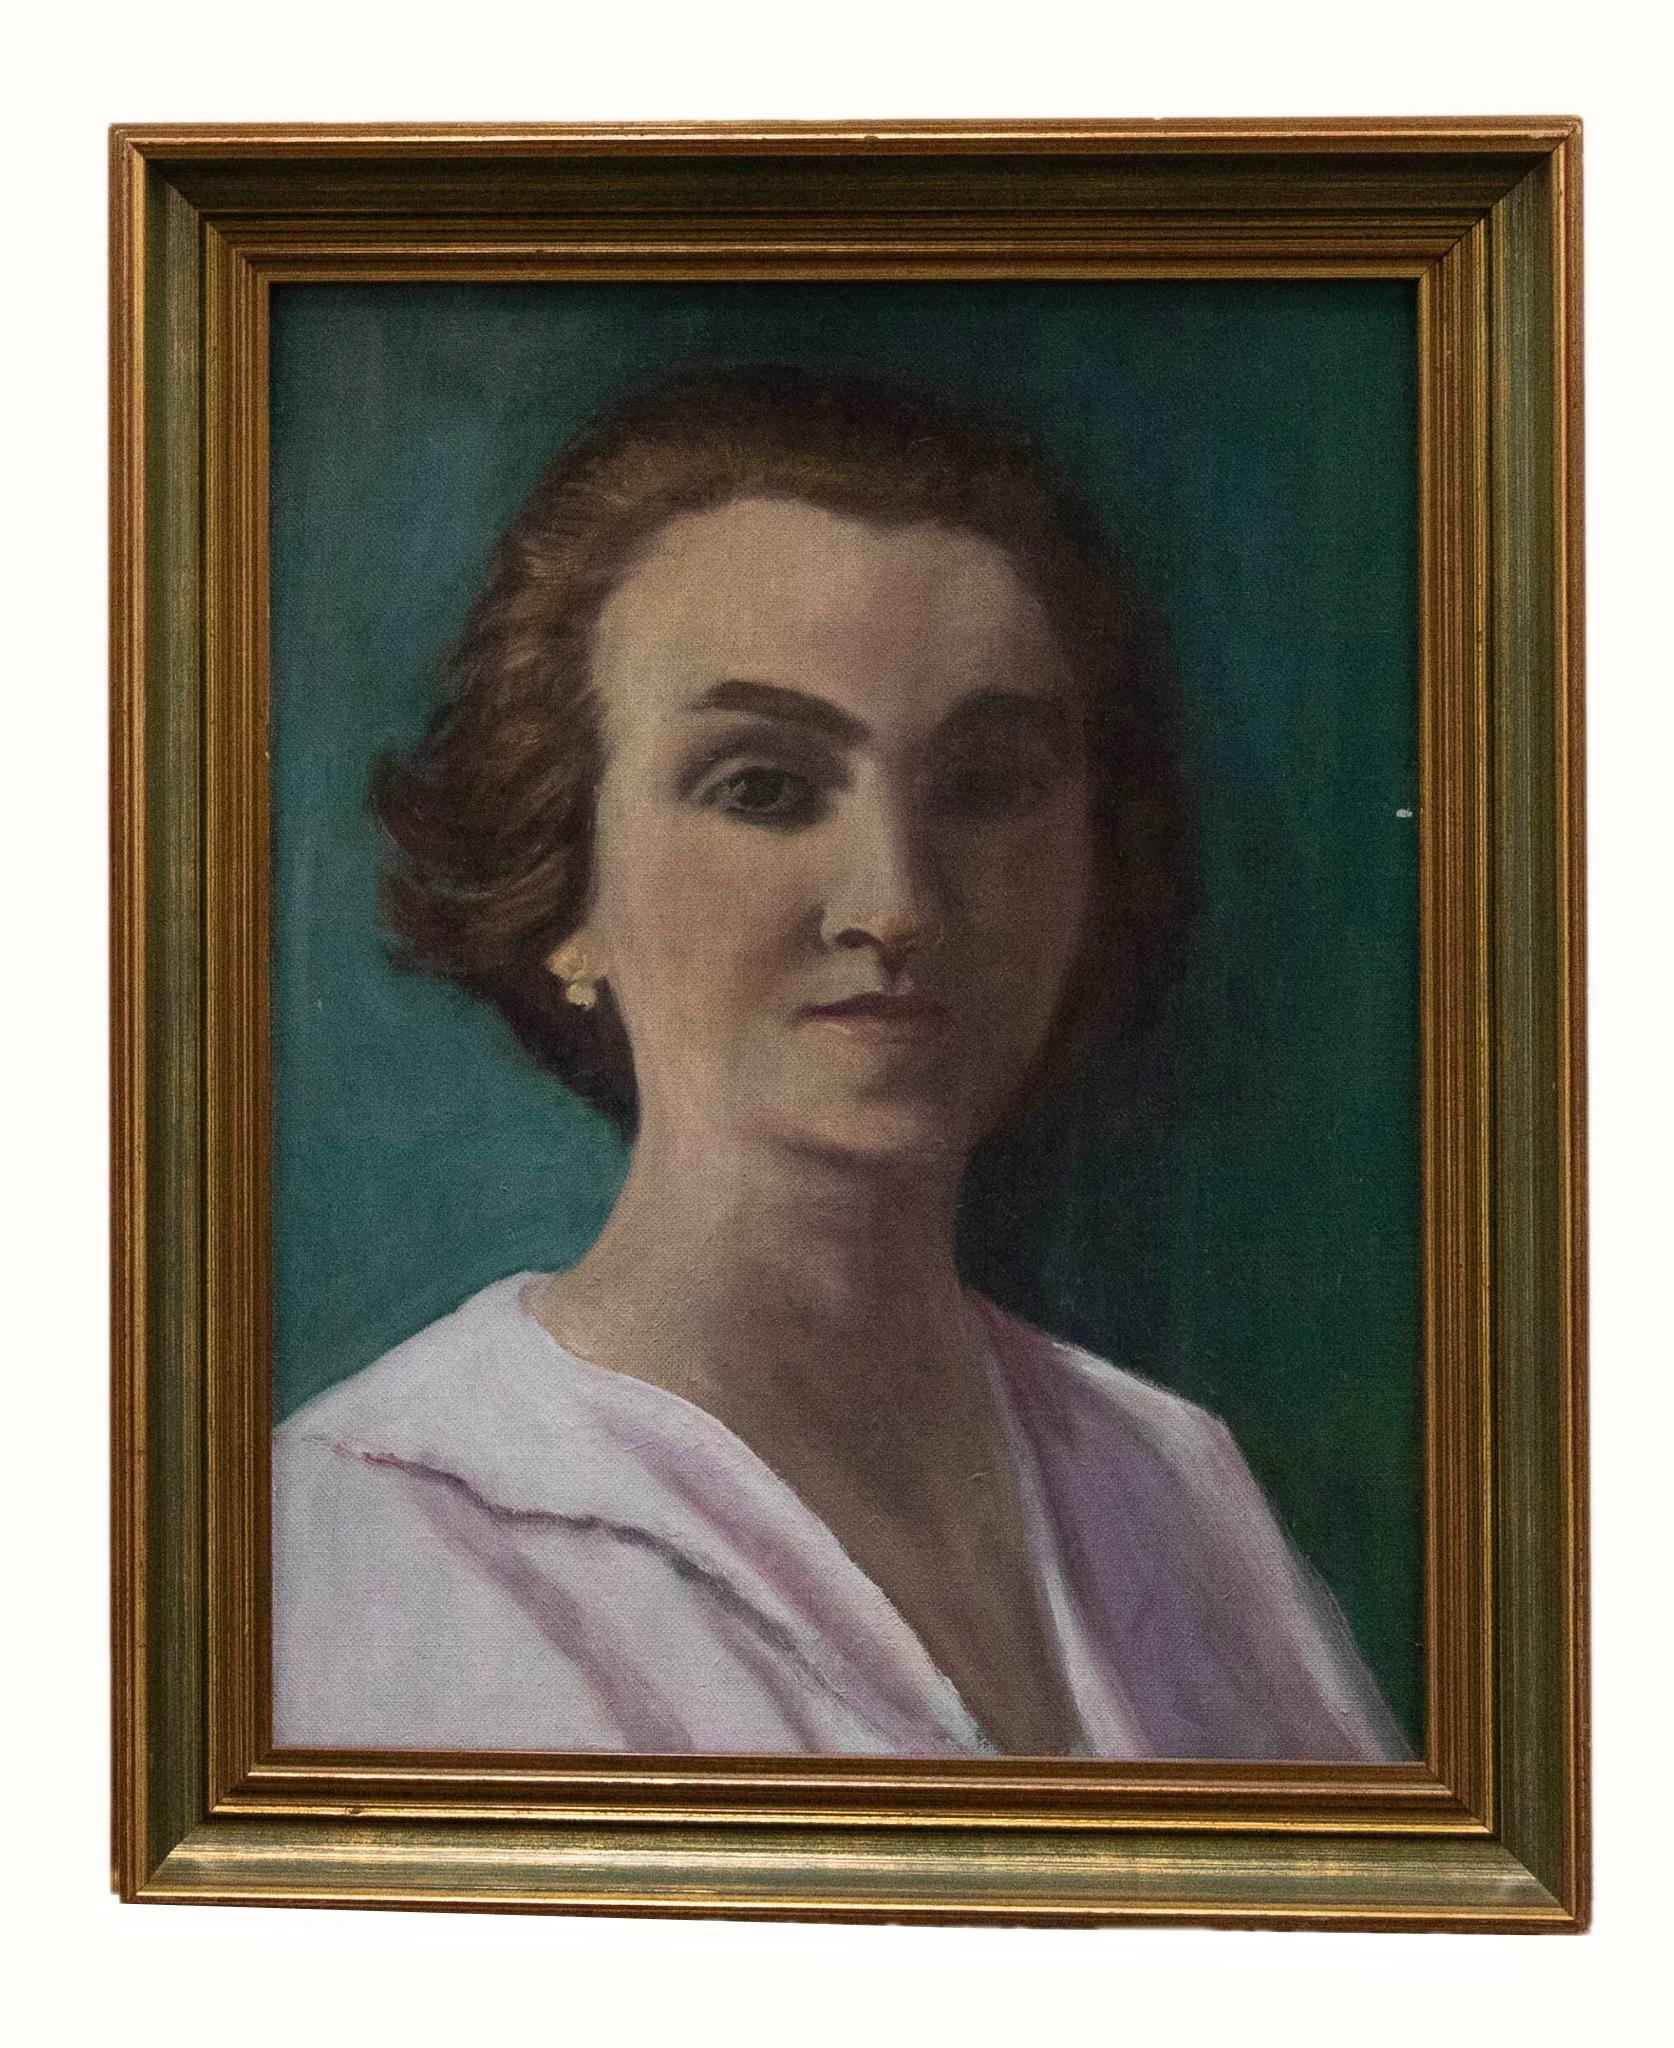 Unknown Portrait Painting - Framed 20th Century Oil - Portrait of a Women